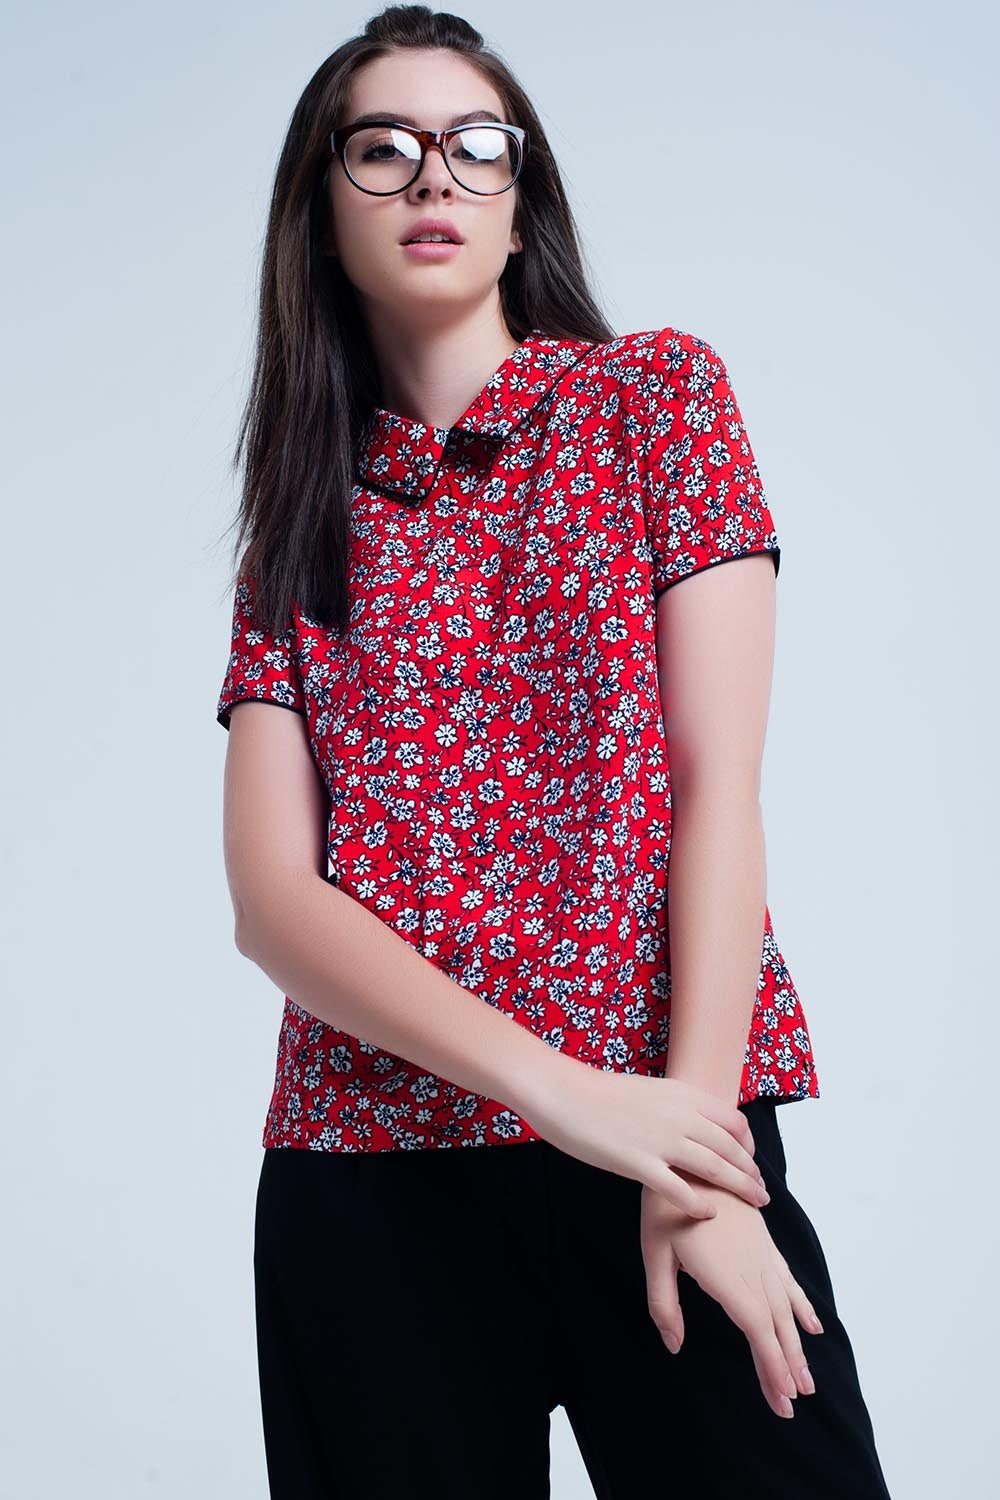 Red Shirt with white flowers printShort Sleeve Tops